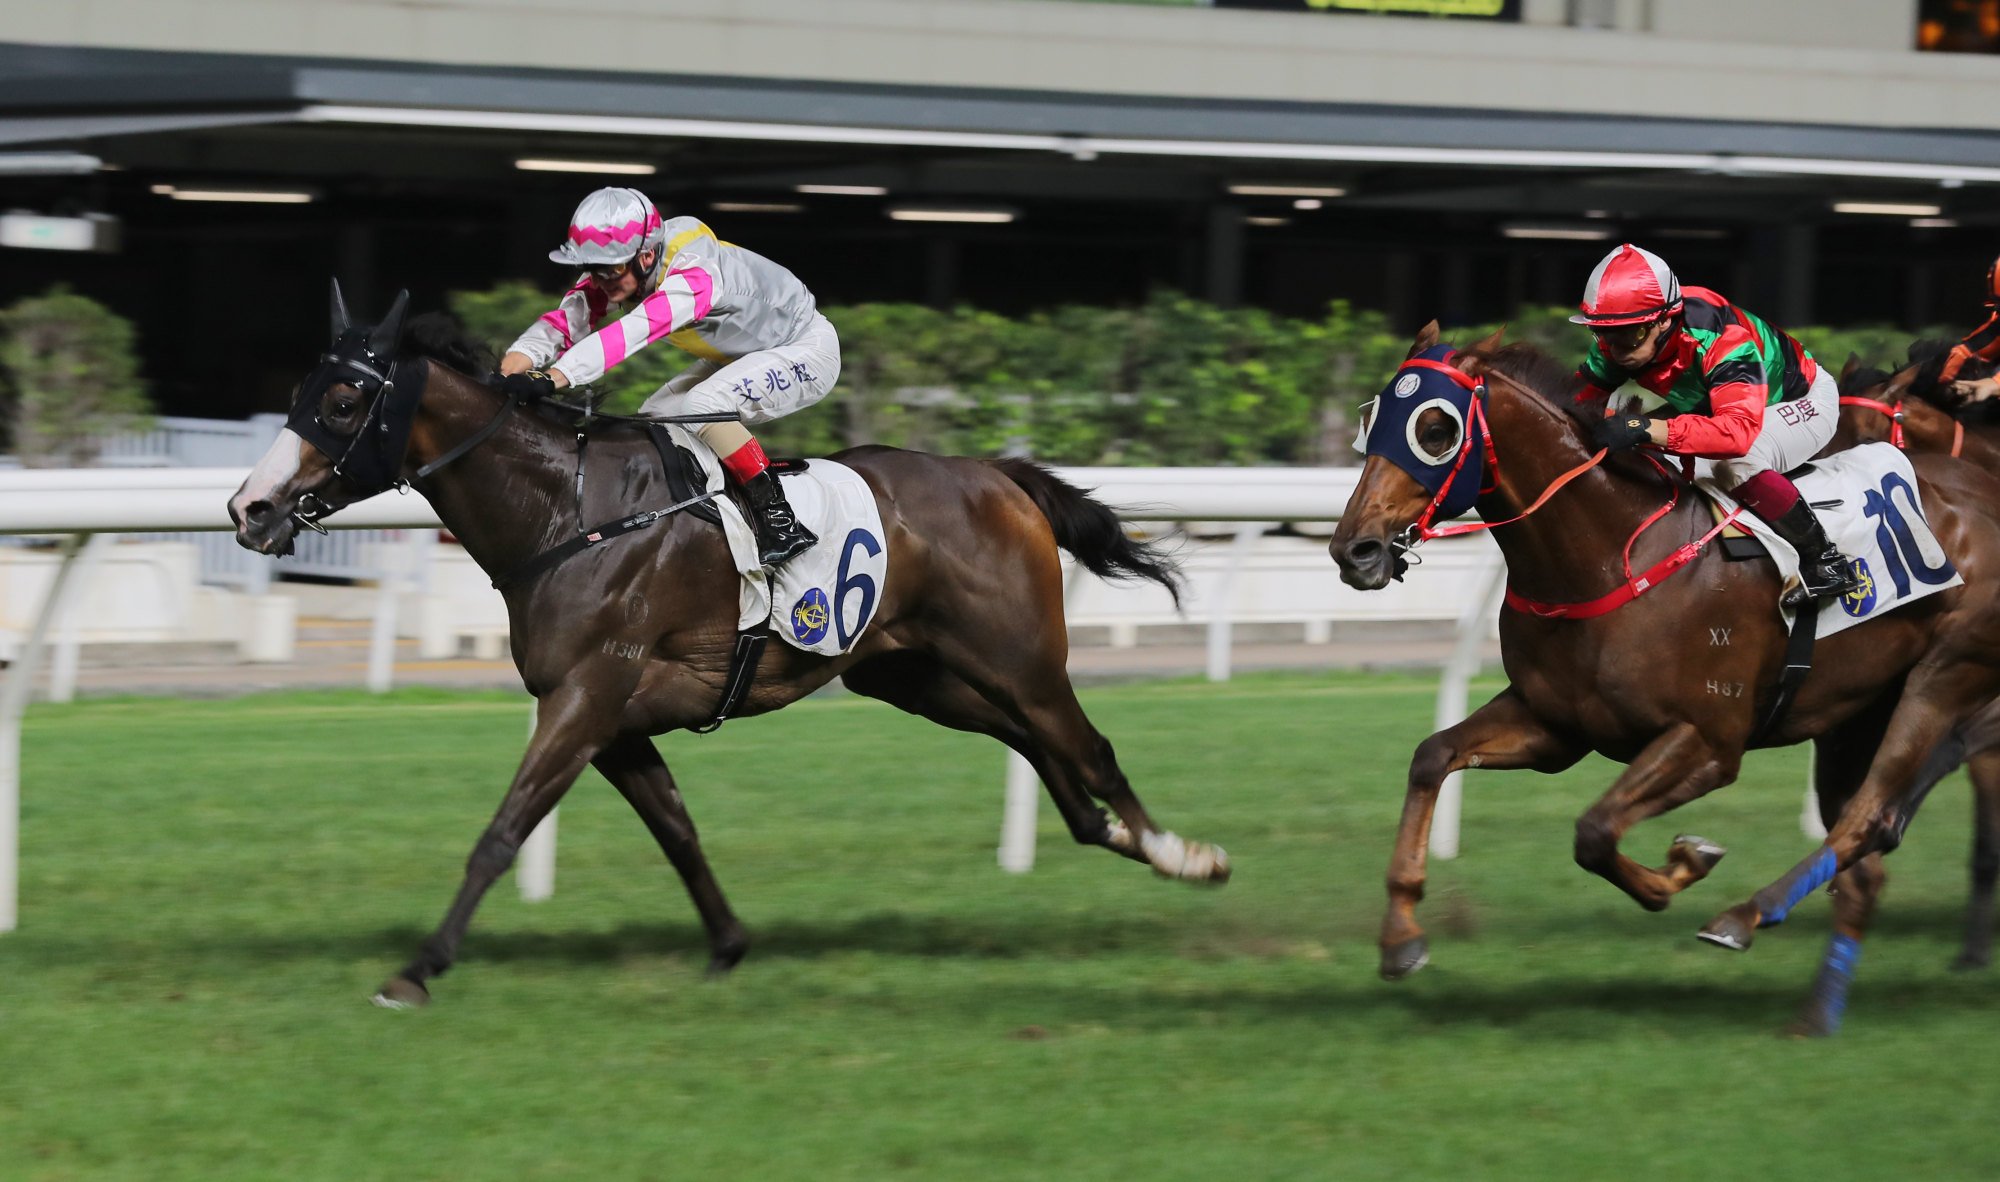 Andrea Atzeni guides I Can to victory at Happy Valley in April.